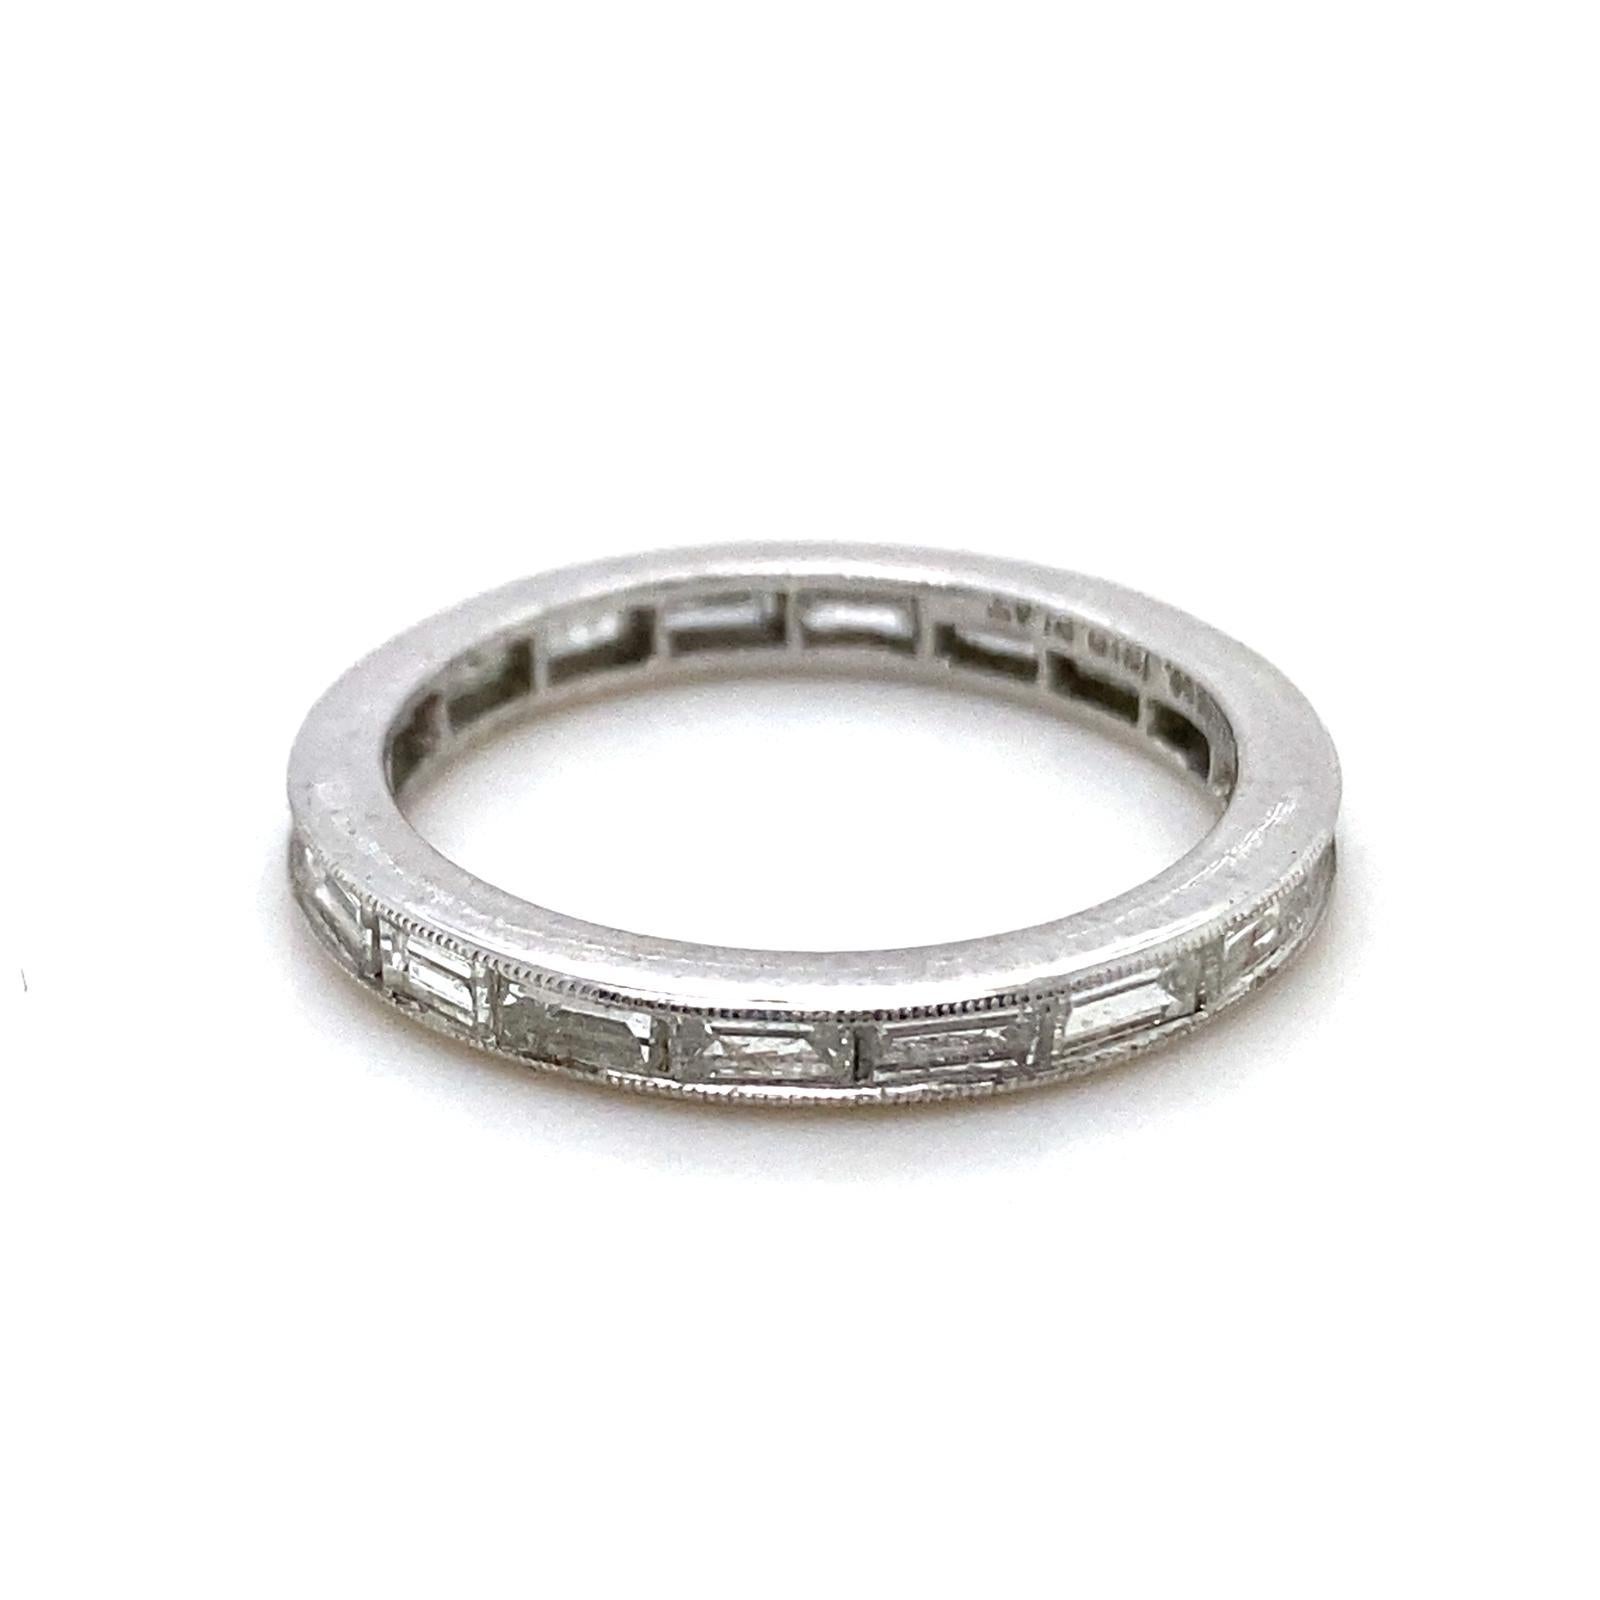 A Tiffany & Co vintage diamond full eternity ring in platinum, circa 1950.

This exceptional full eternity band is set with a single row of baguette cut diamonds, totalling 0.90 carats approximately all of high colour and clarity, assessed by